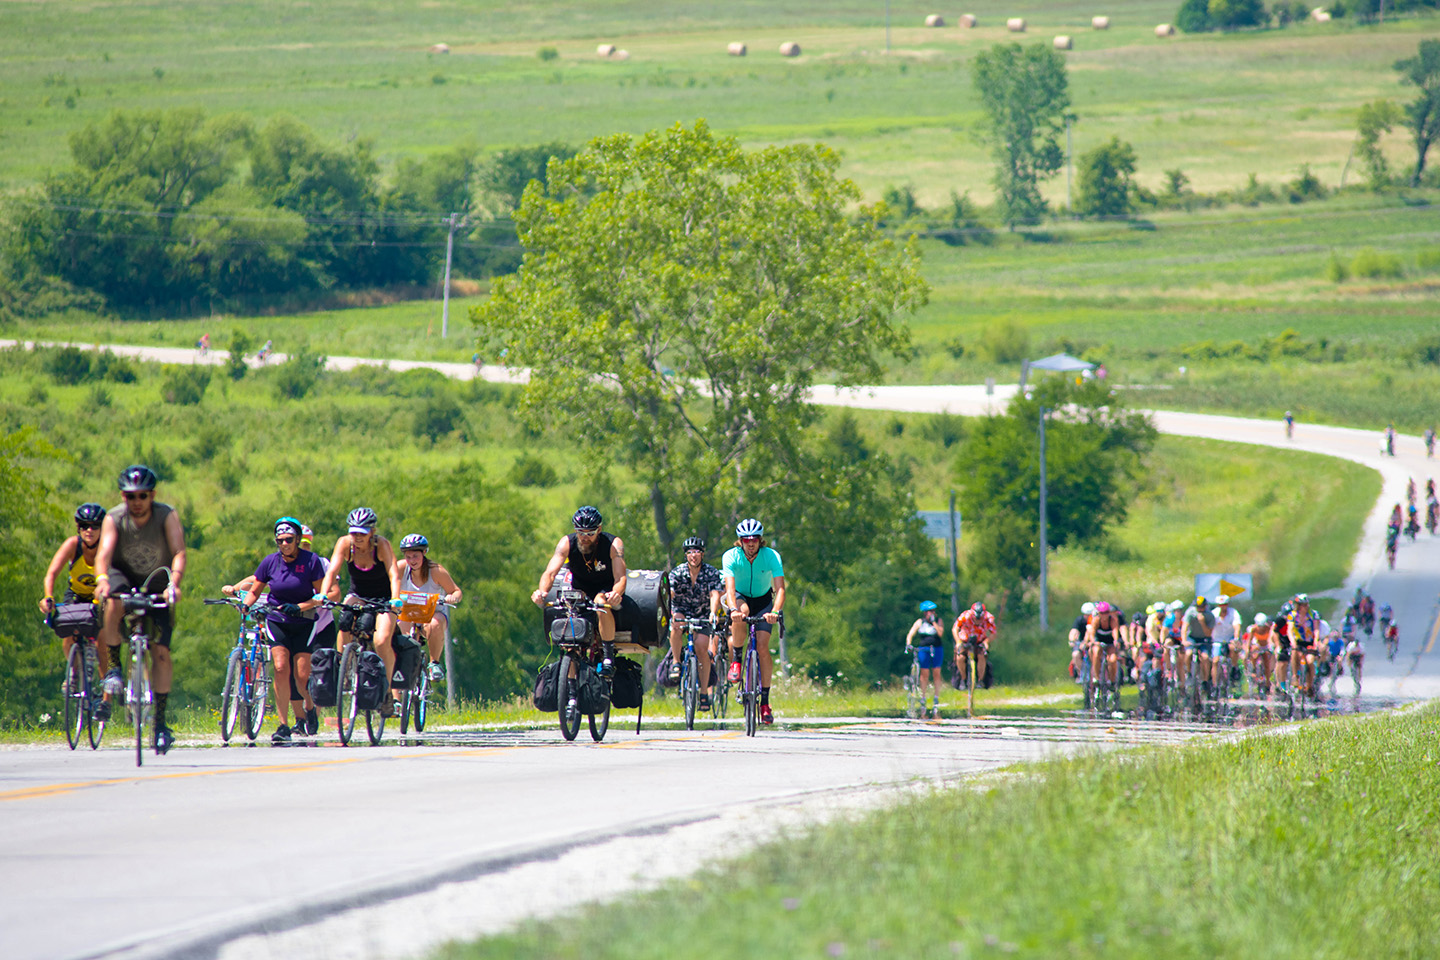 Cyclists participating in RAGBRAI will have a close up 